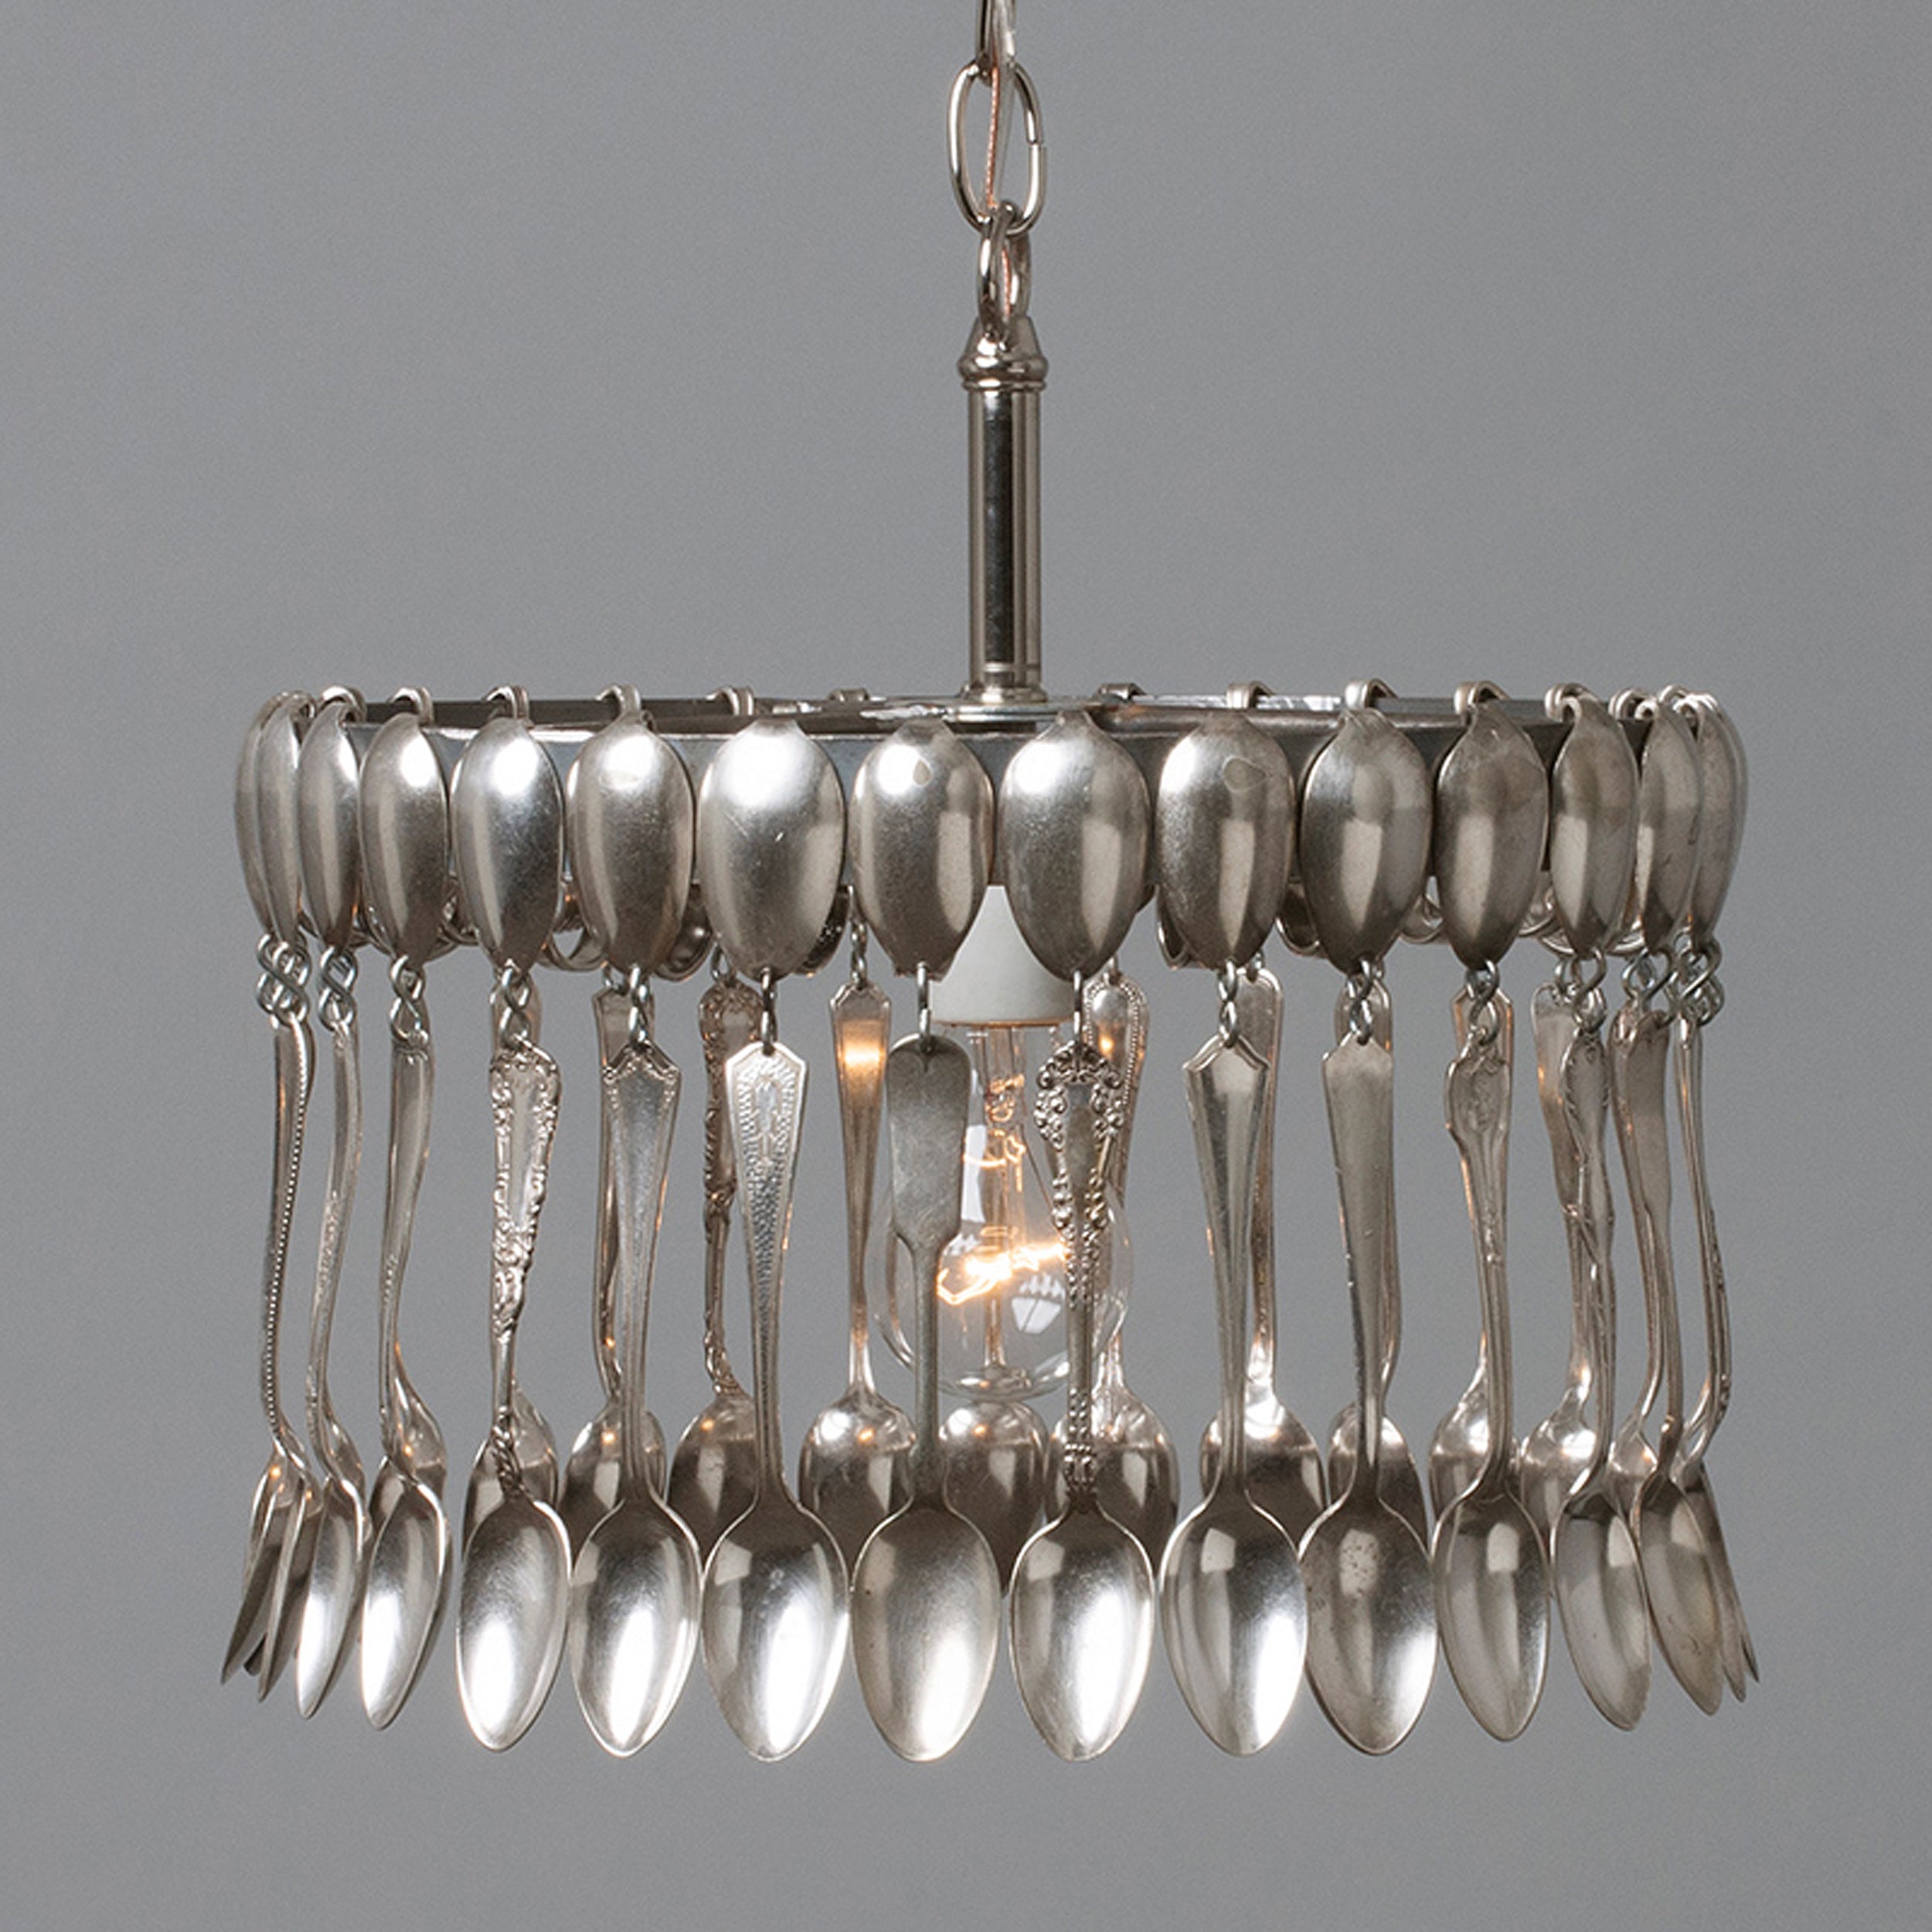 A hand-crafted Spoon Pendant Light made of vintage spoons hanging from a chain by Hester &amp; Cook.